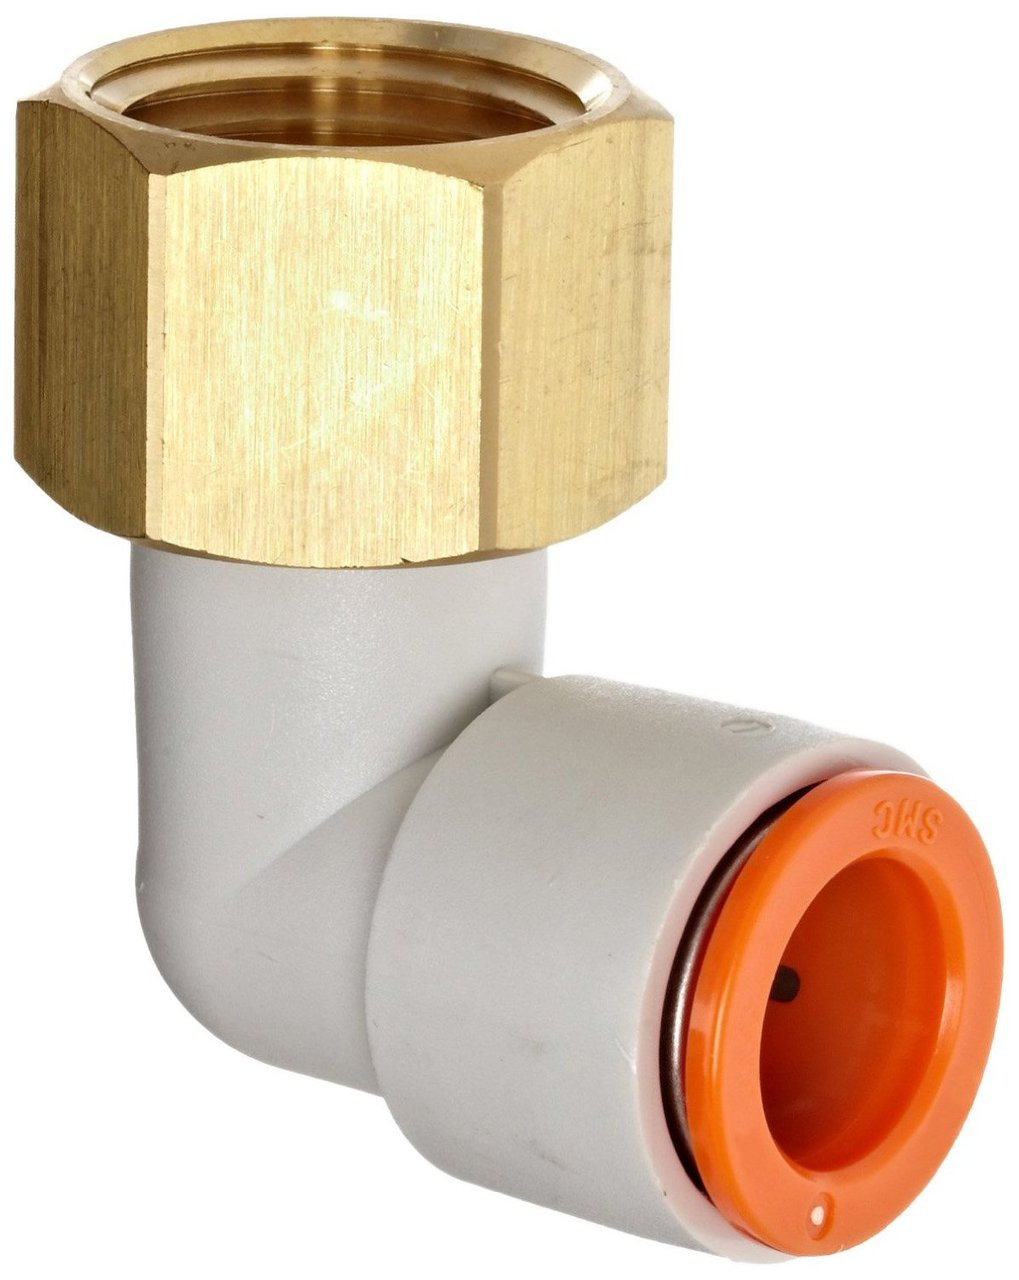 Schnitz Fitting Brass Quick Connect 90 Degree 1/8" NPT Female to 1/8" Line